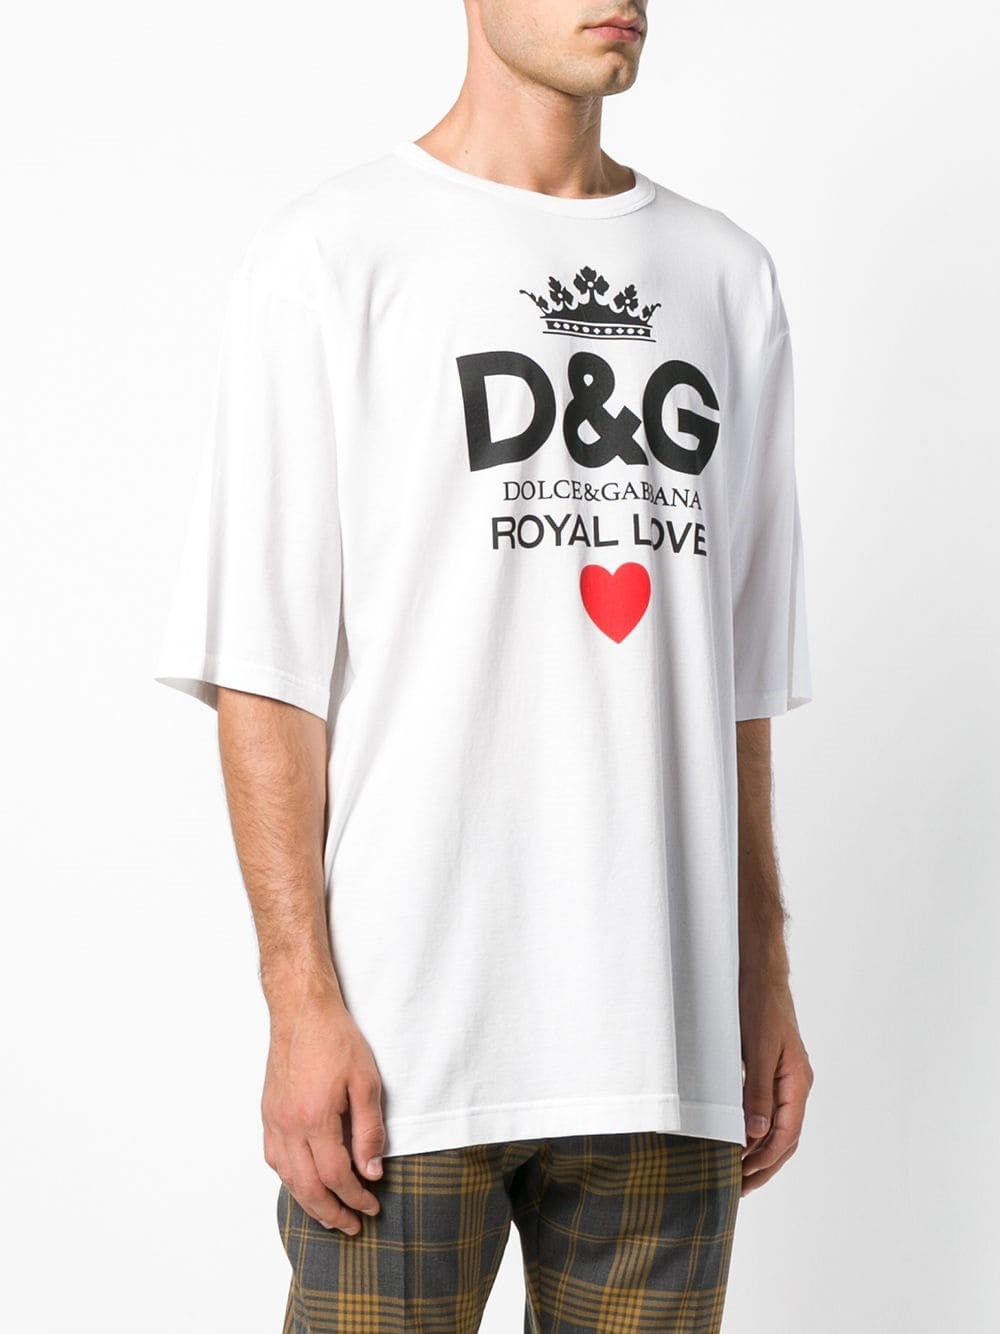 dolce & gabbana ROYAL LOVE T-SHIRT available on montiboutique.com - 23546